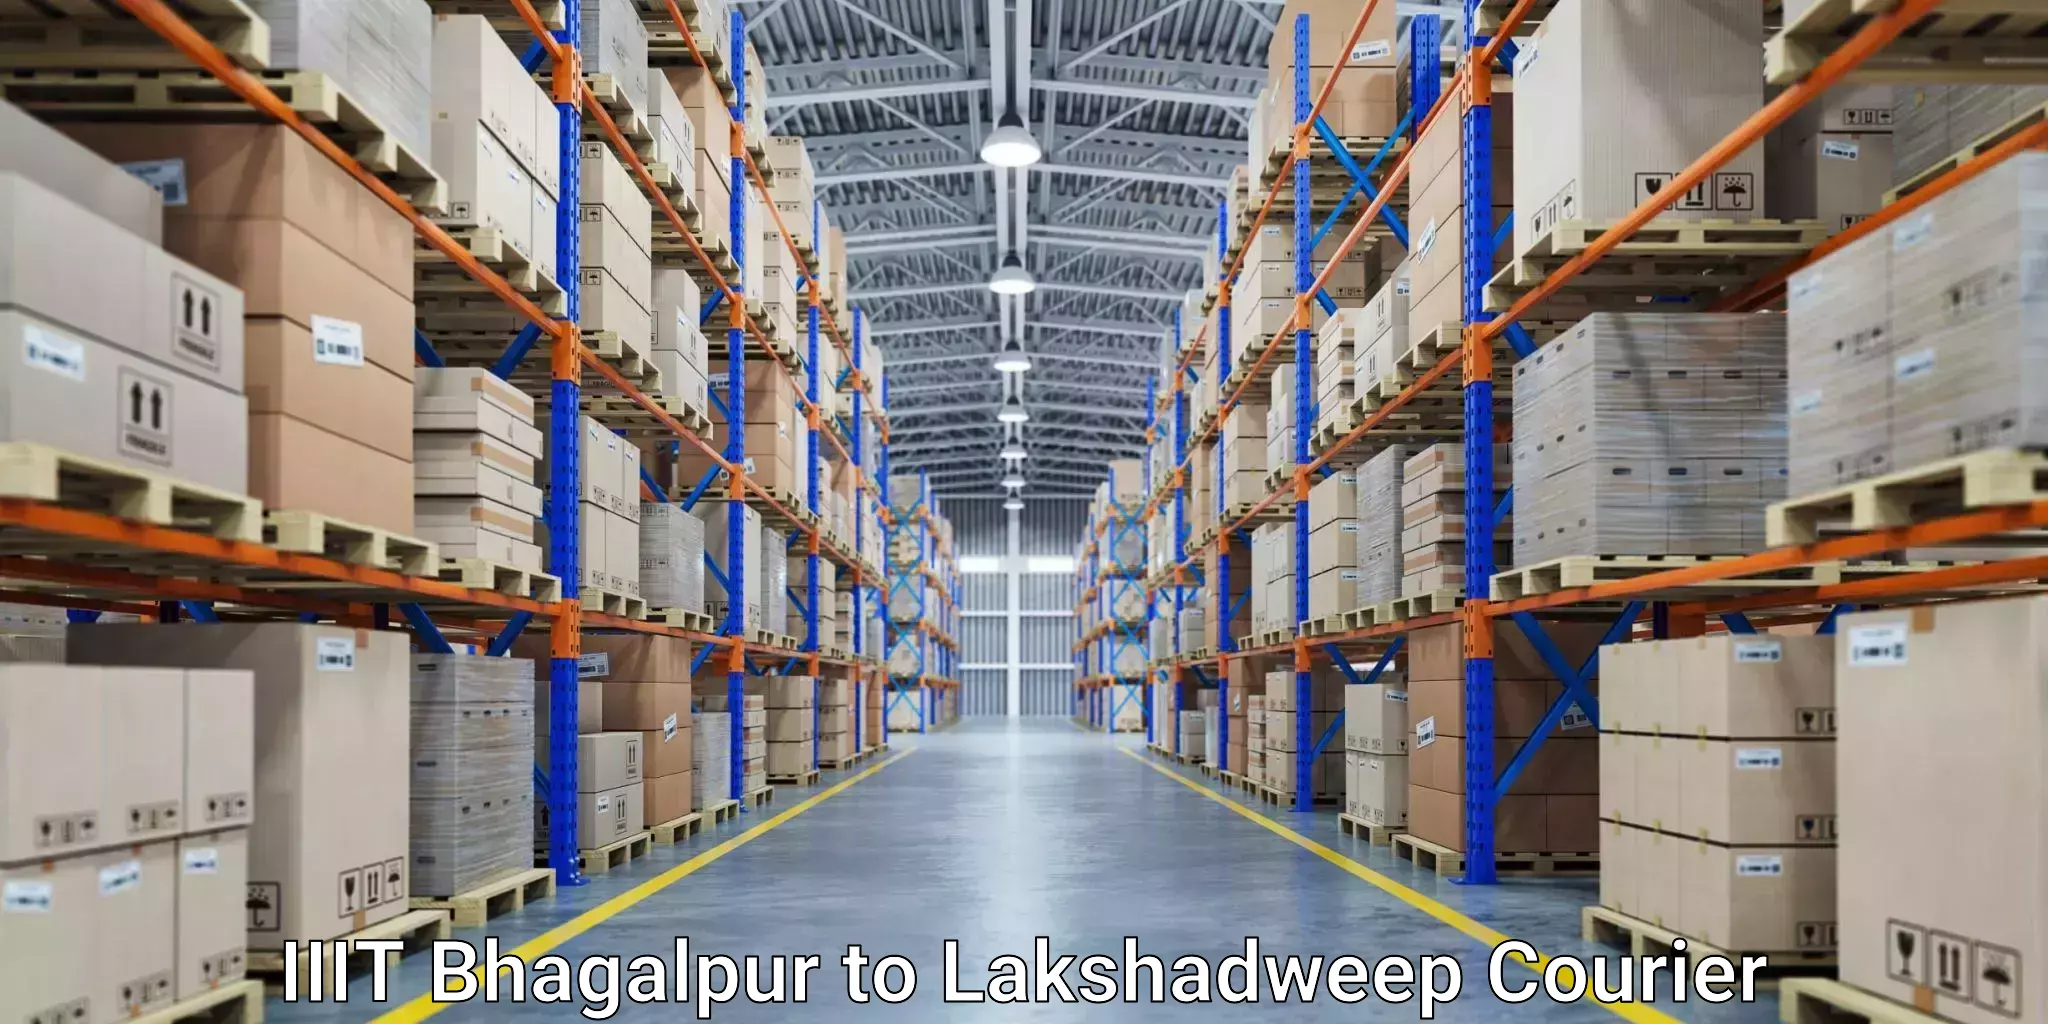 Comprehensive shipping services IIIT Bhagalpur to Lakshadweep